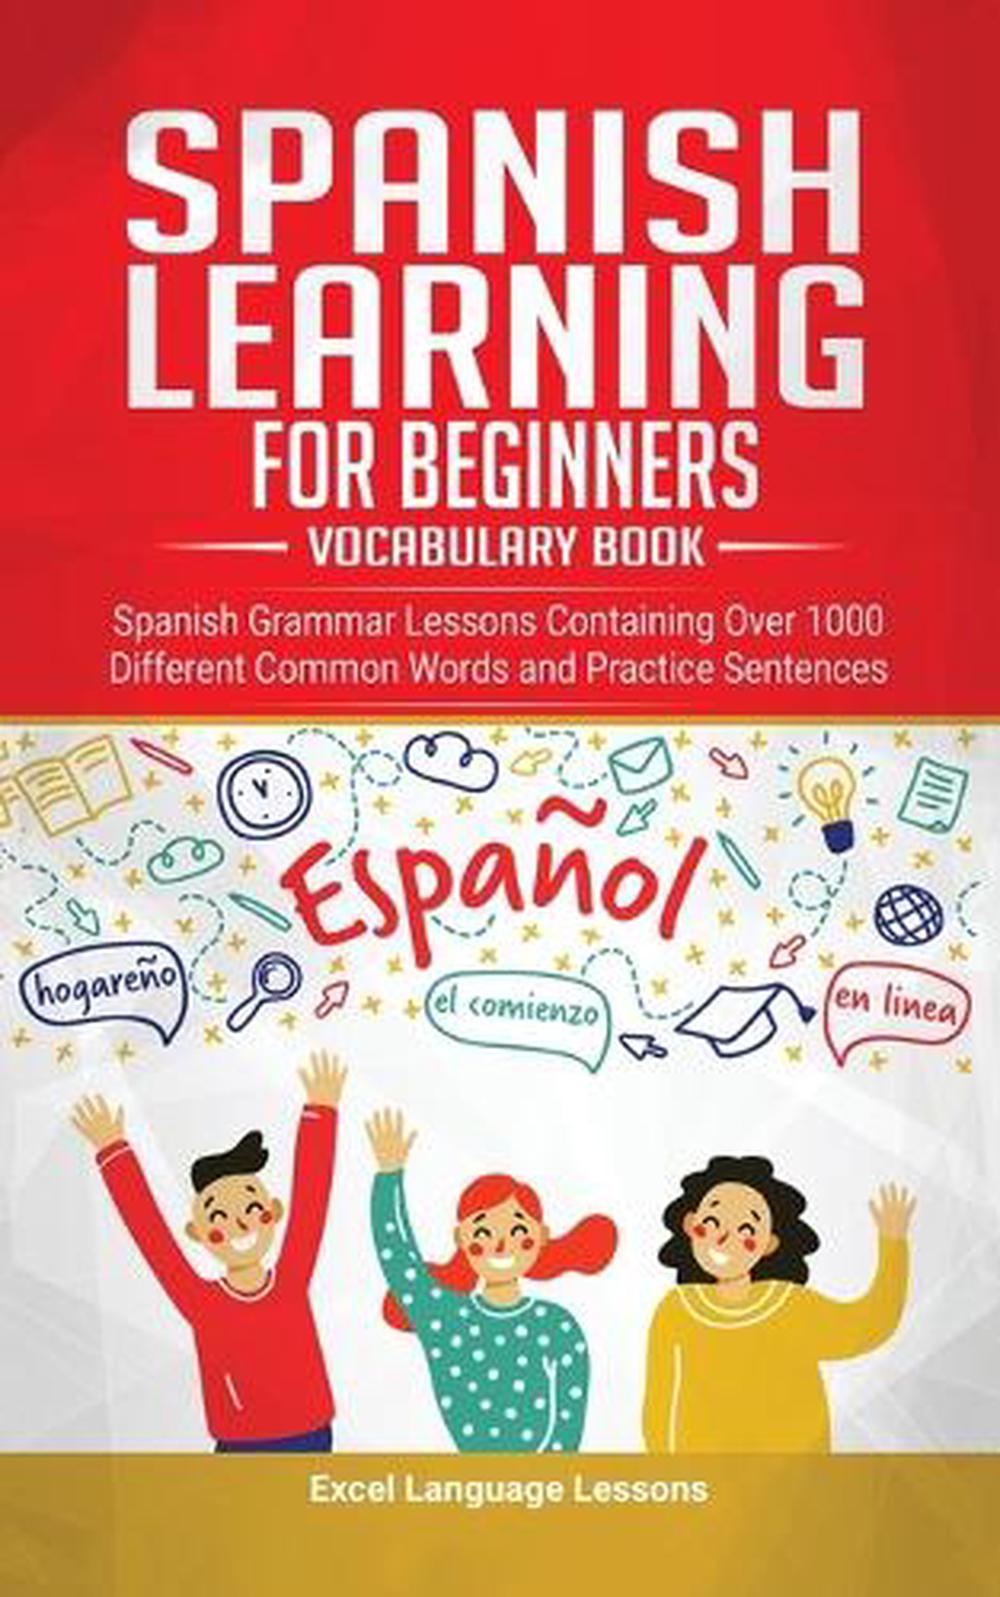 Spanish Language Learning for Beginner's - Vocabulary Book ...